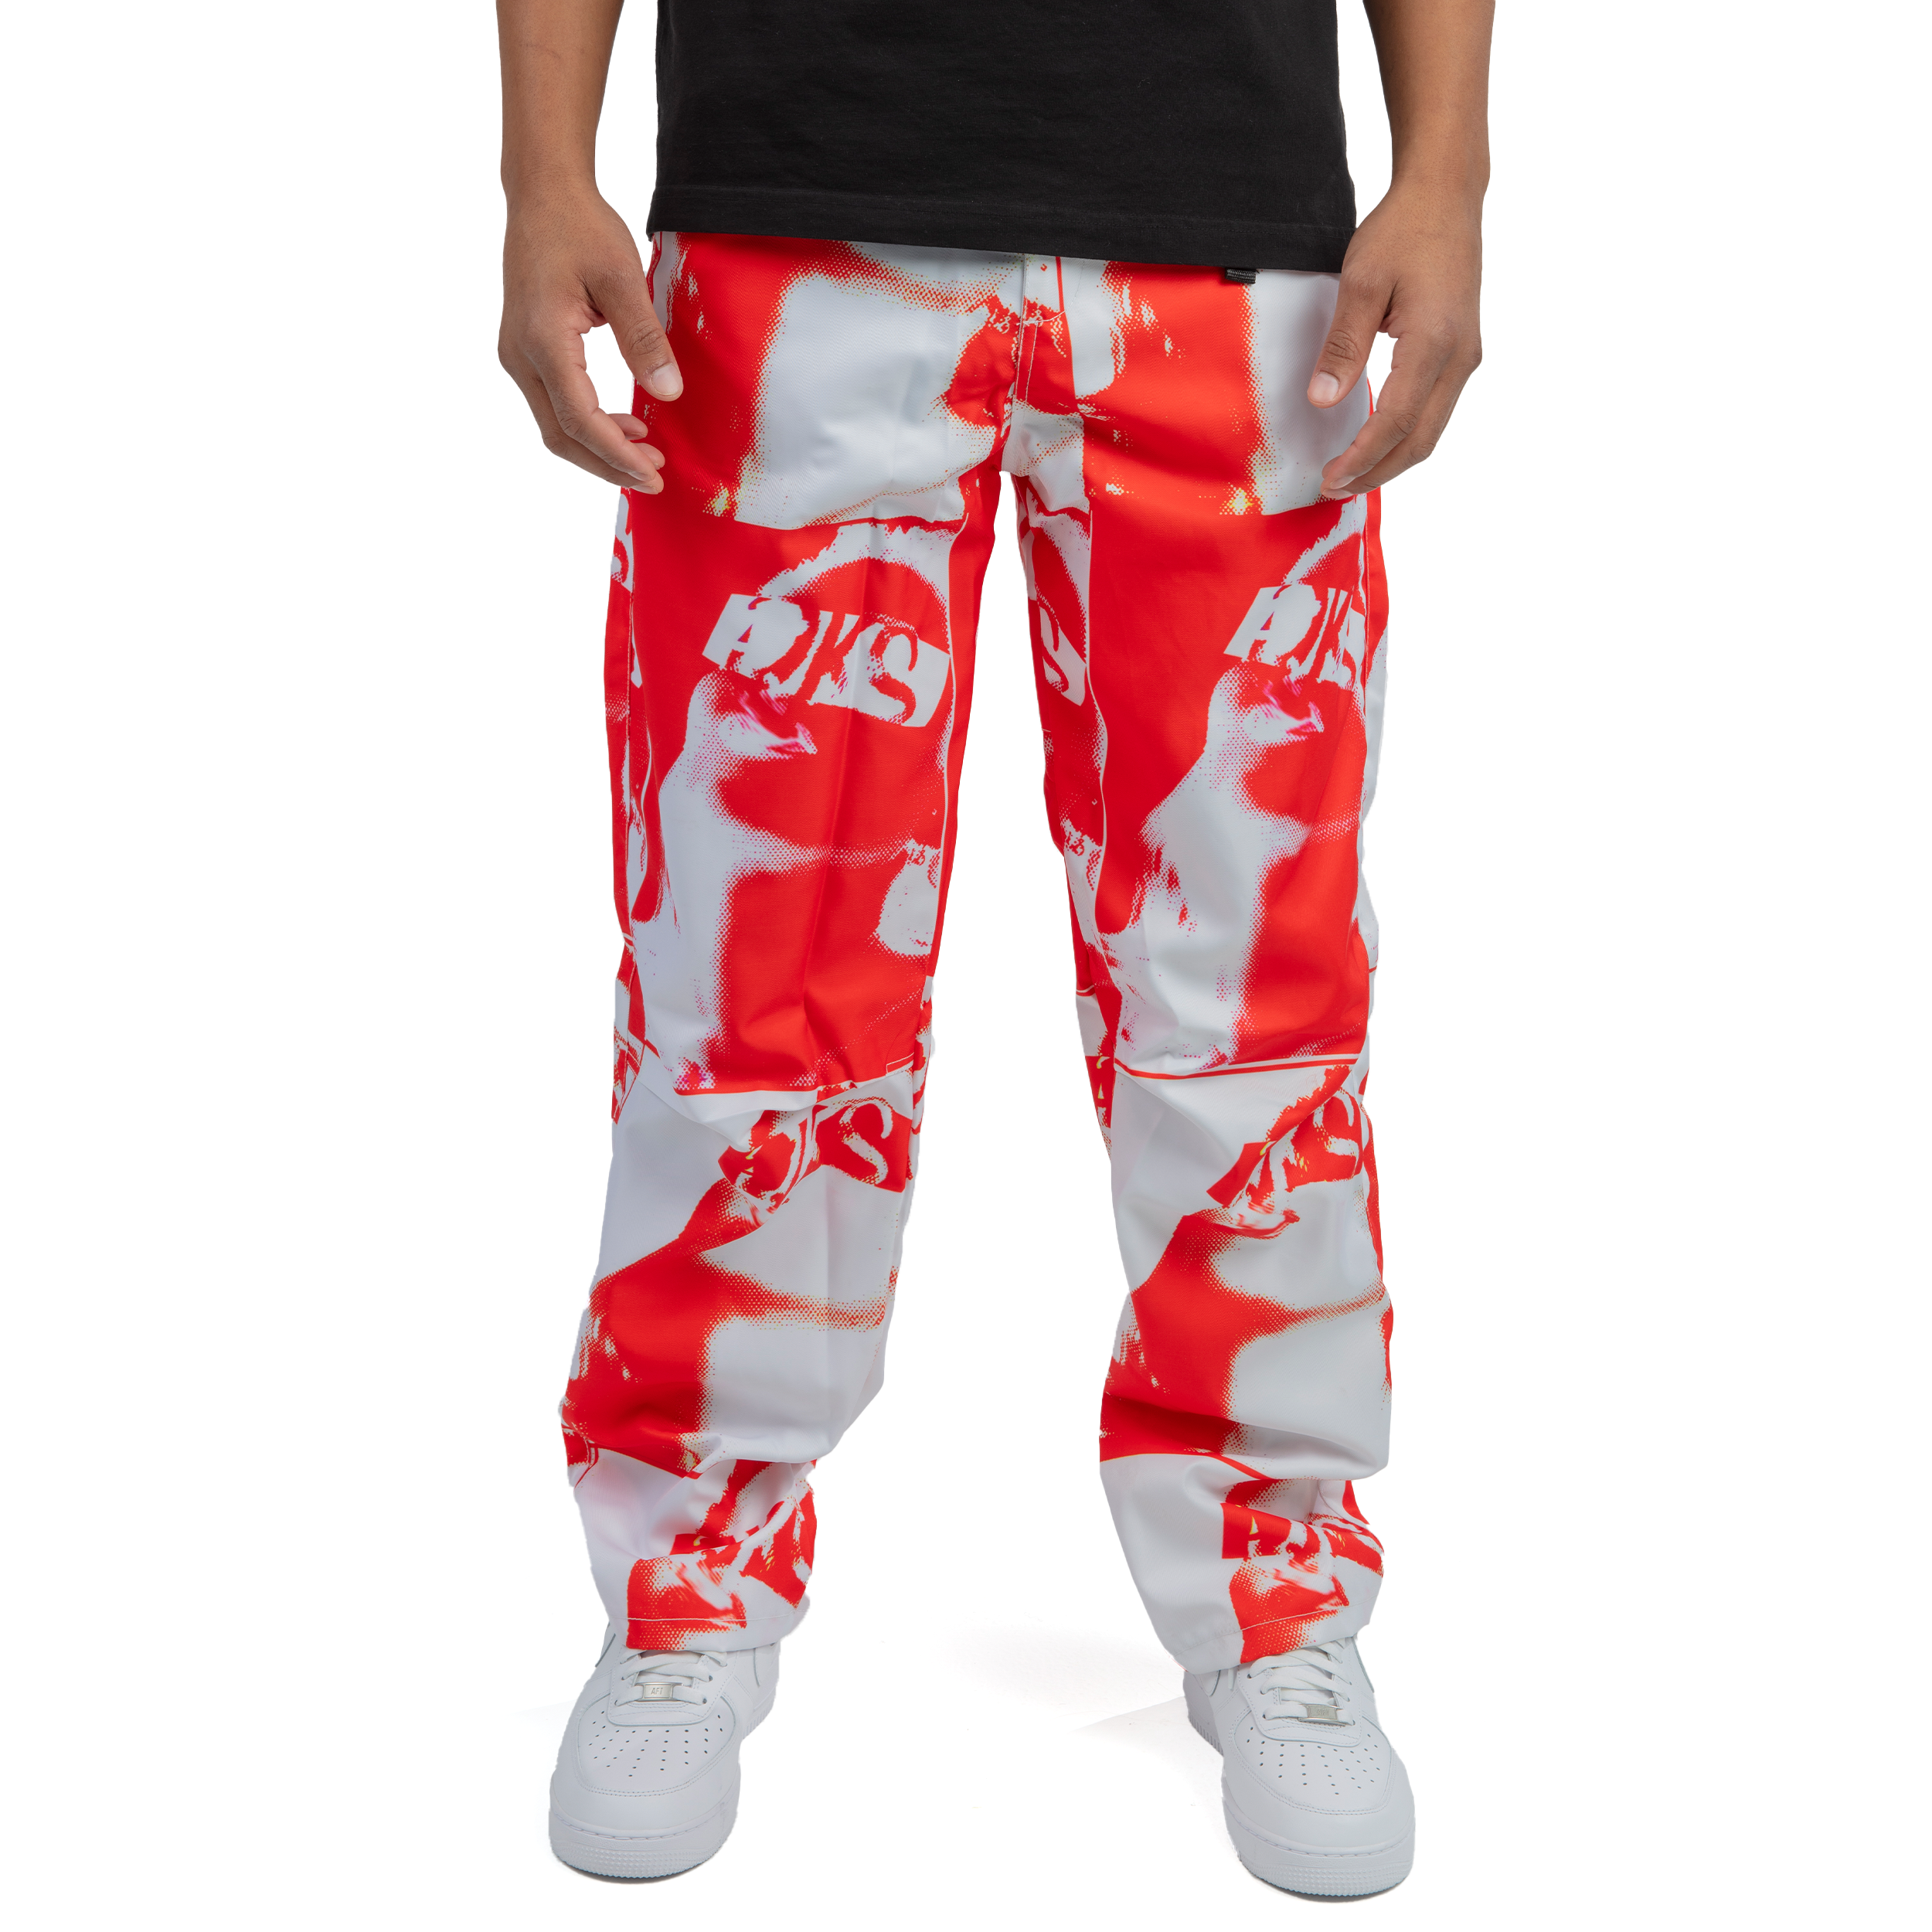 DKS "All Red" Cargo Pants